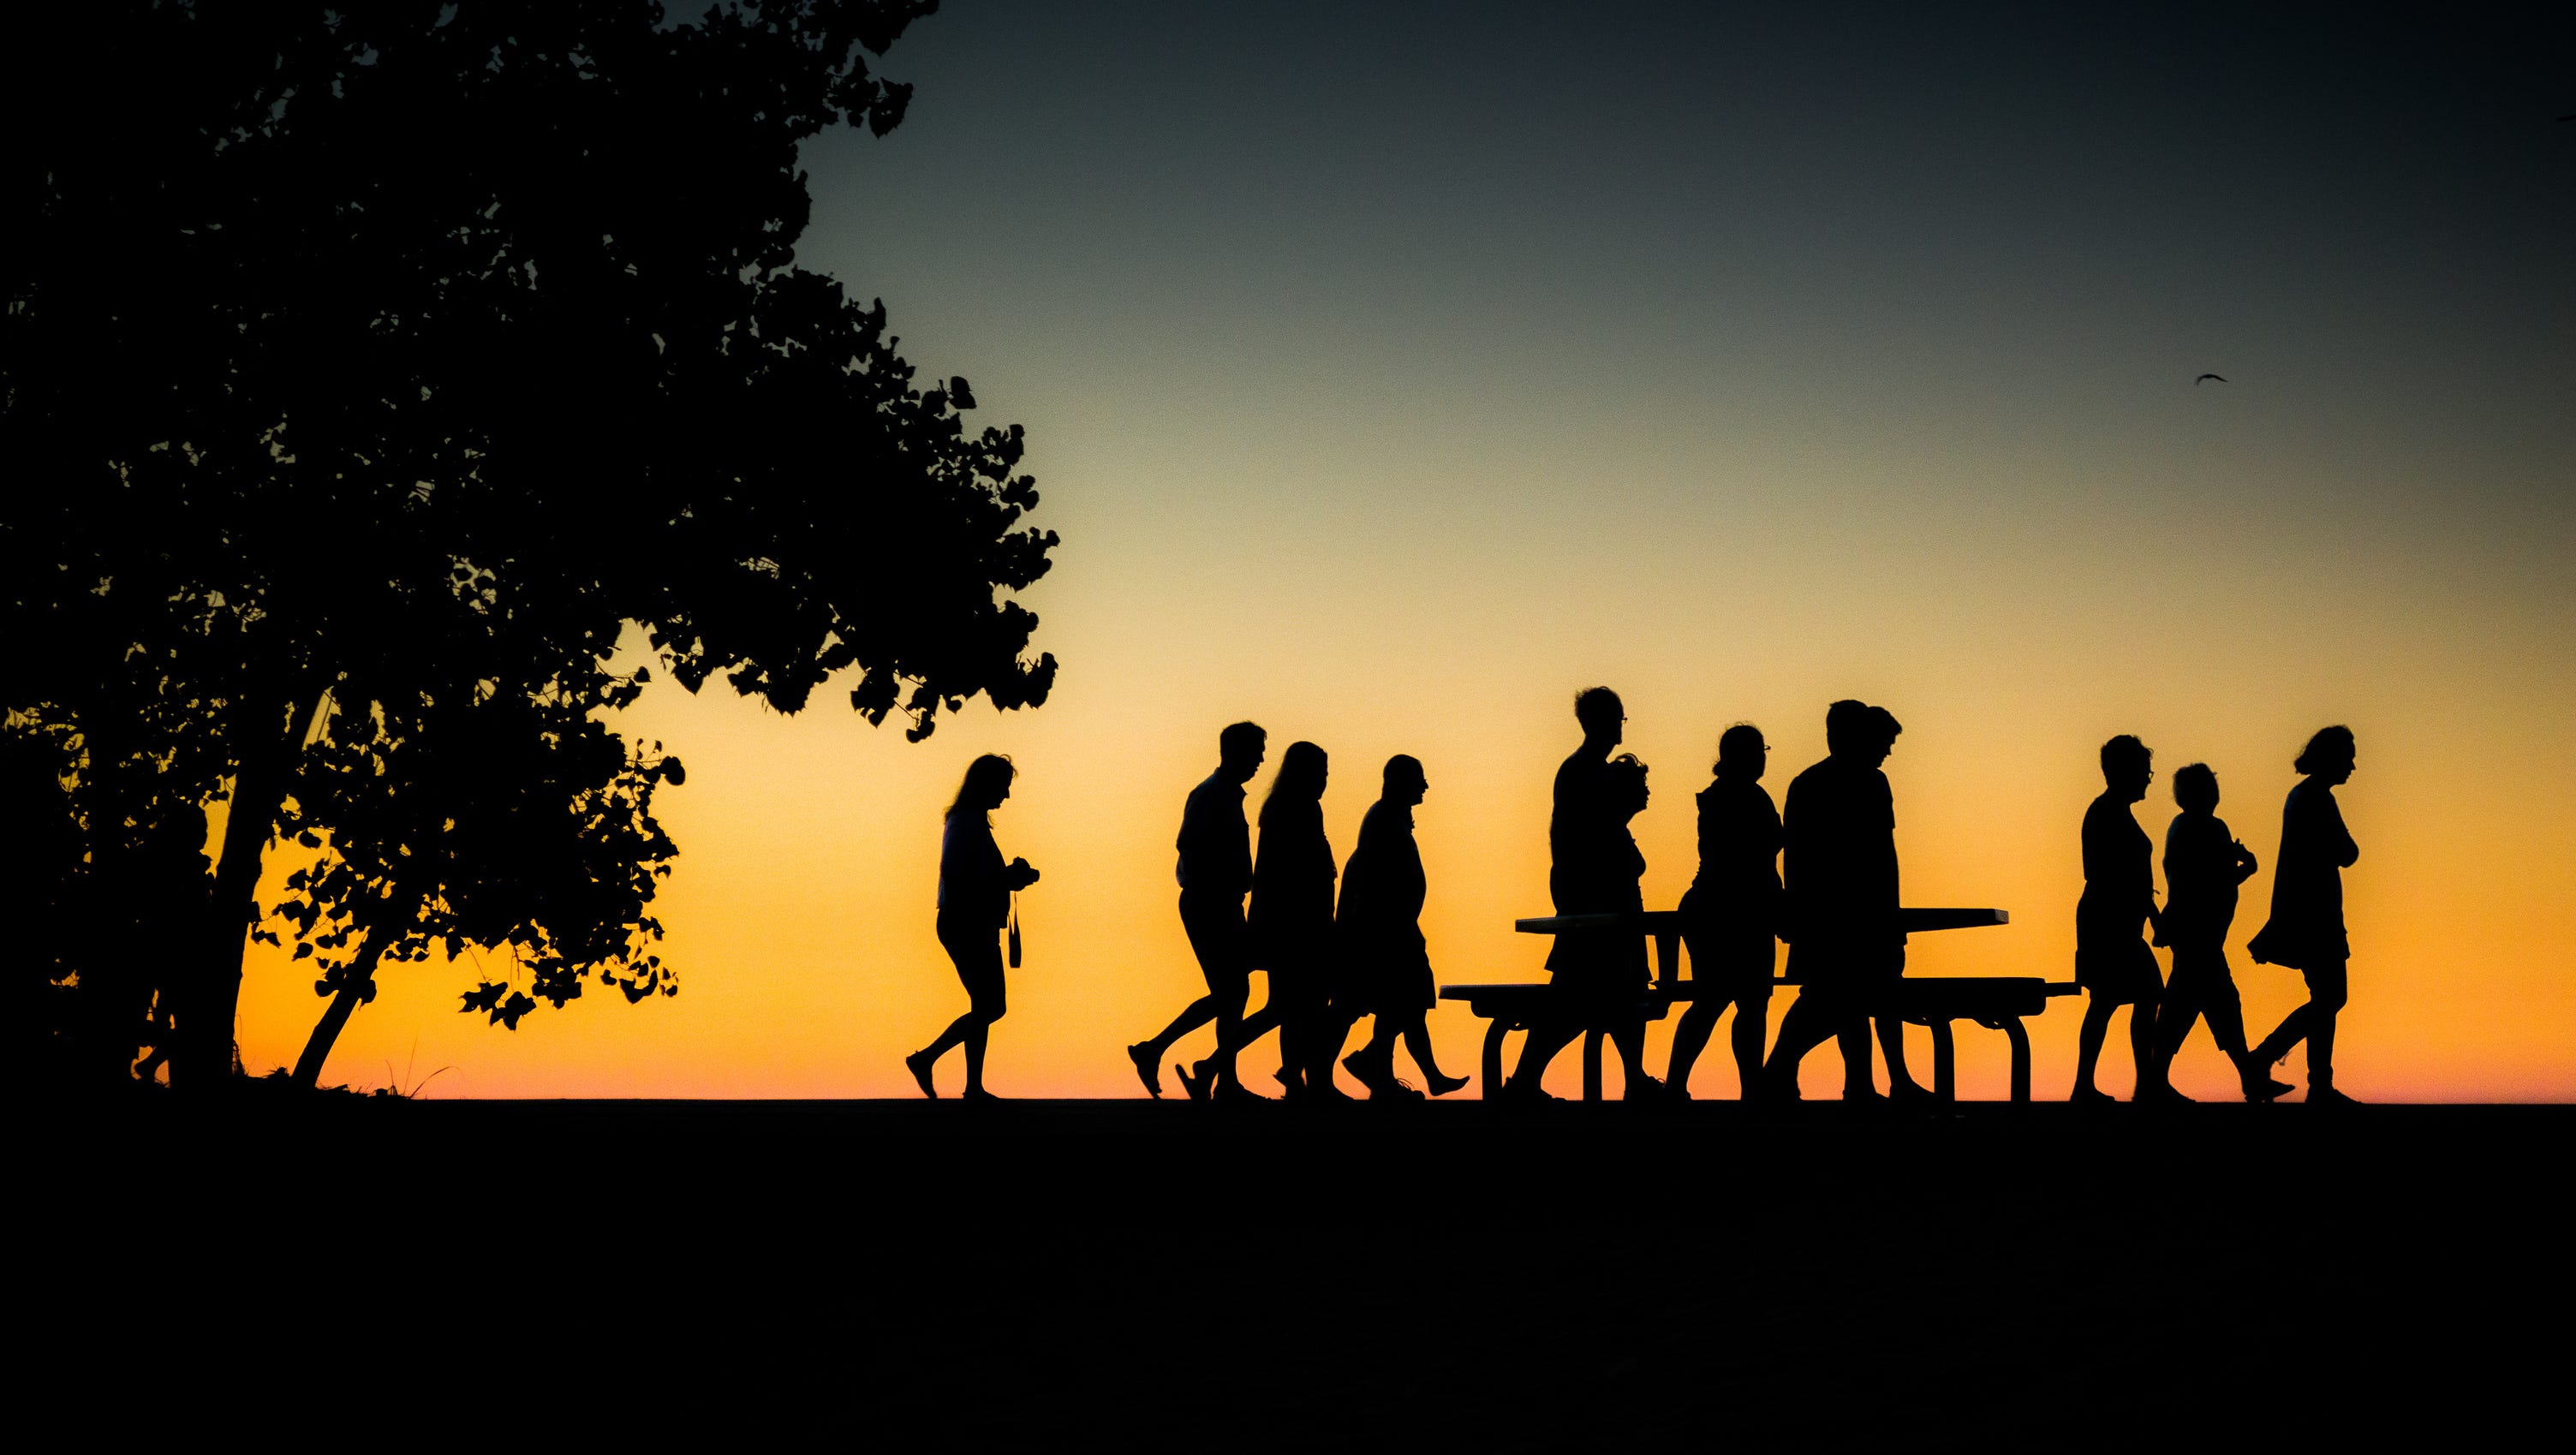 People leave Holland State Park after watching the Lake Michigan sunset in "Day's End," by Brian Sokol of Brownstown.